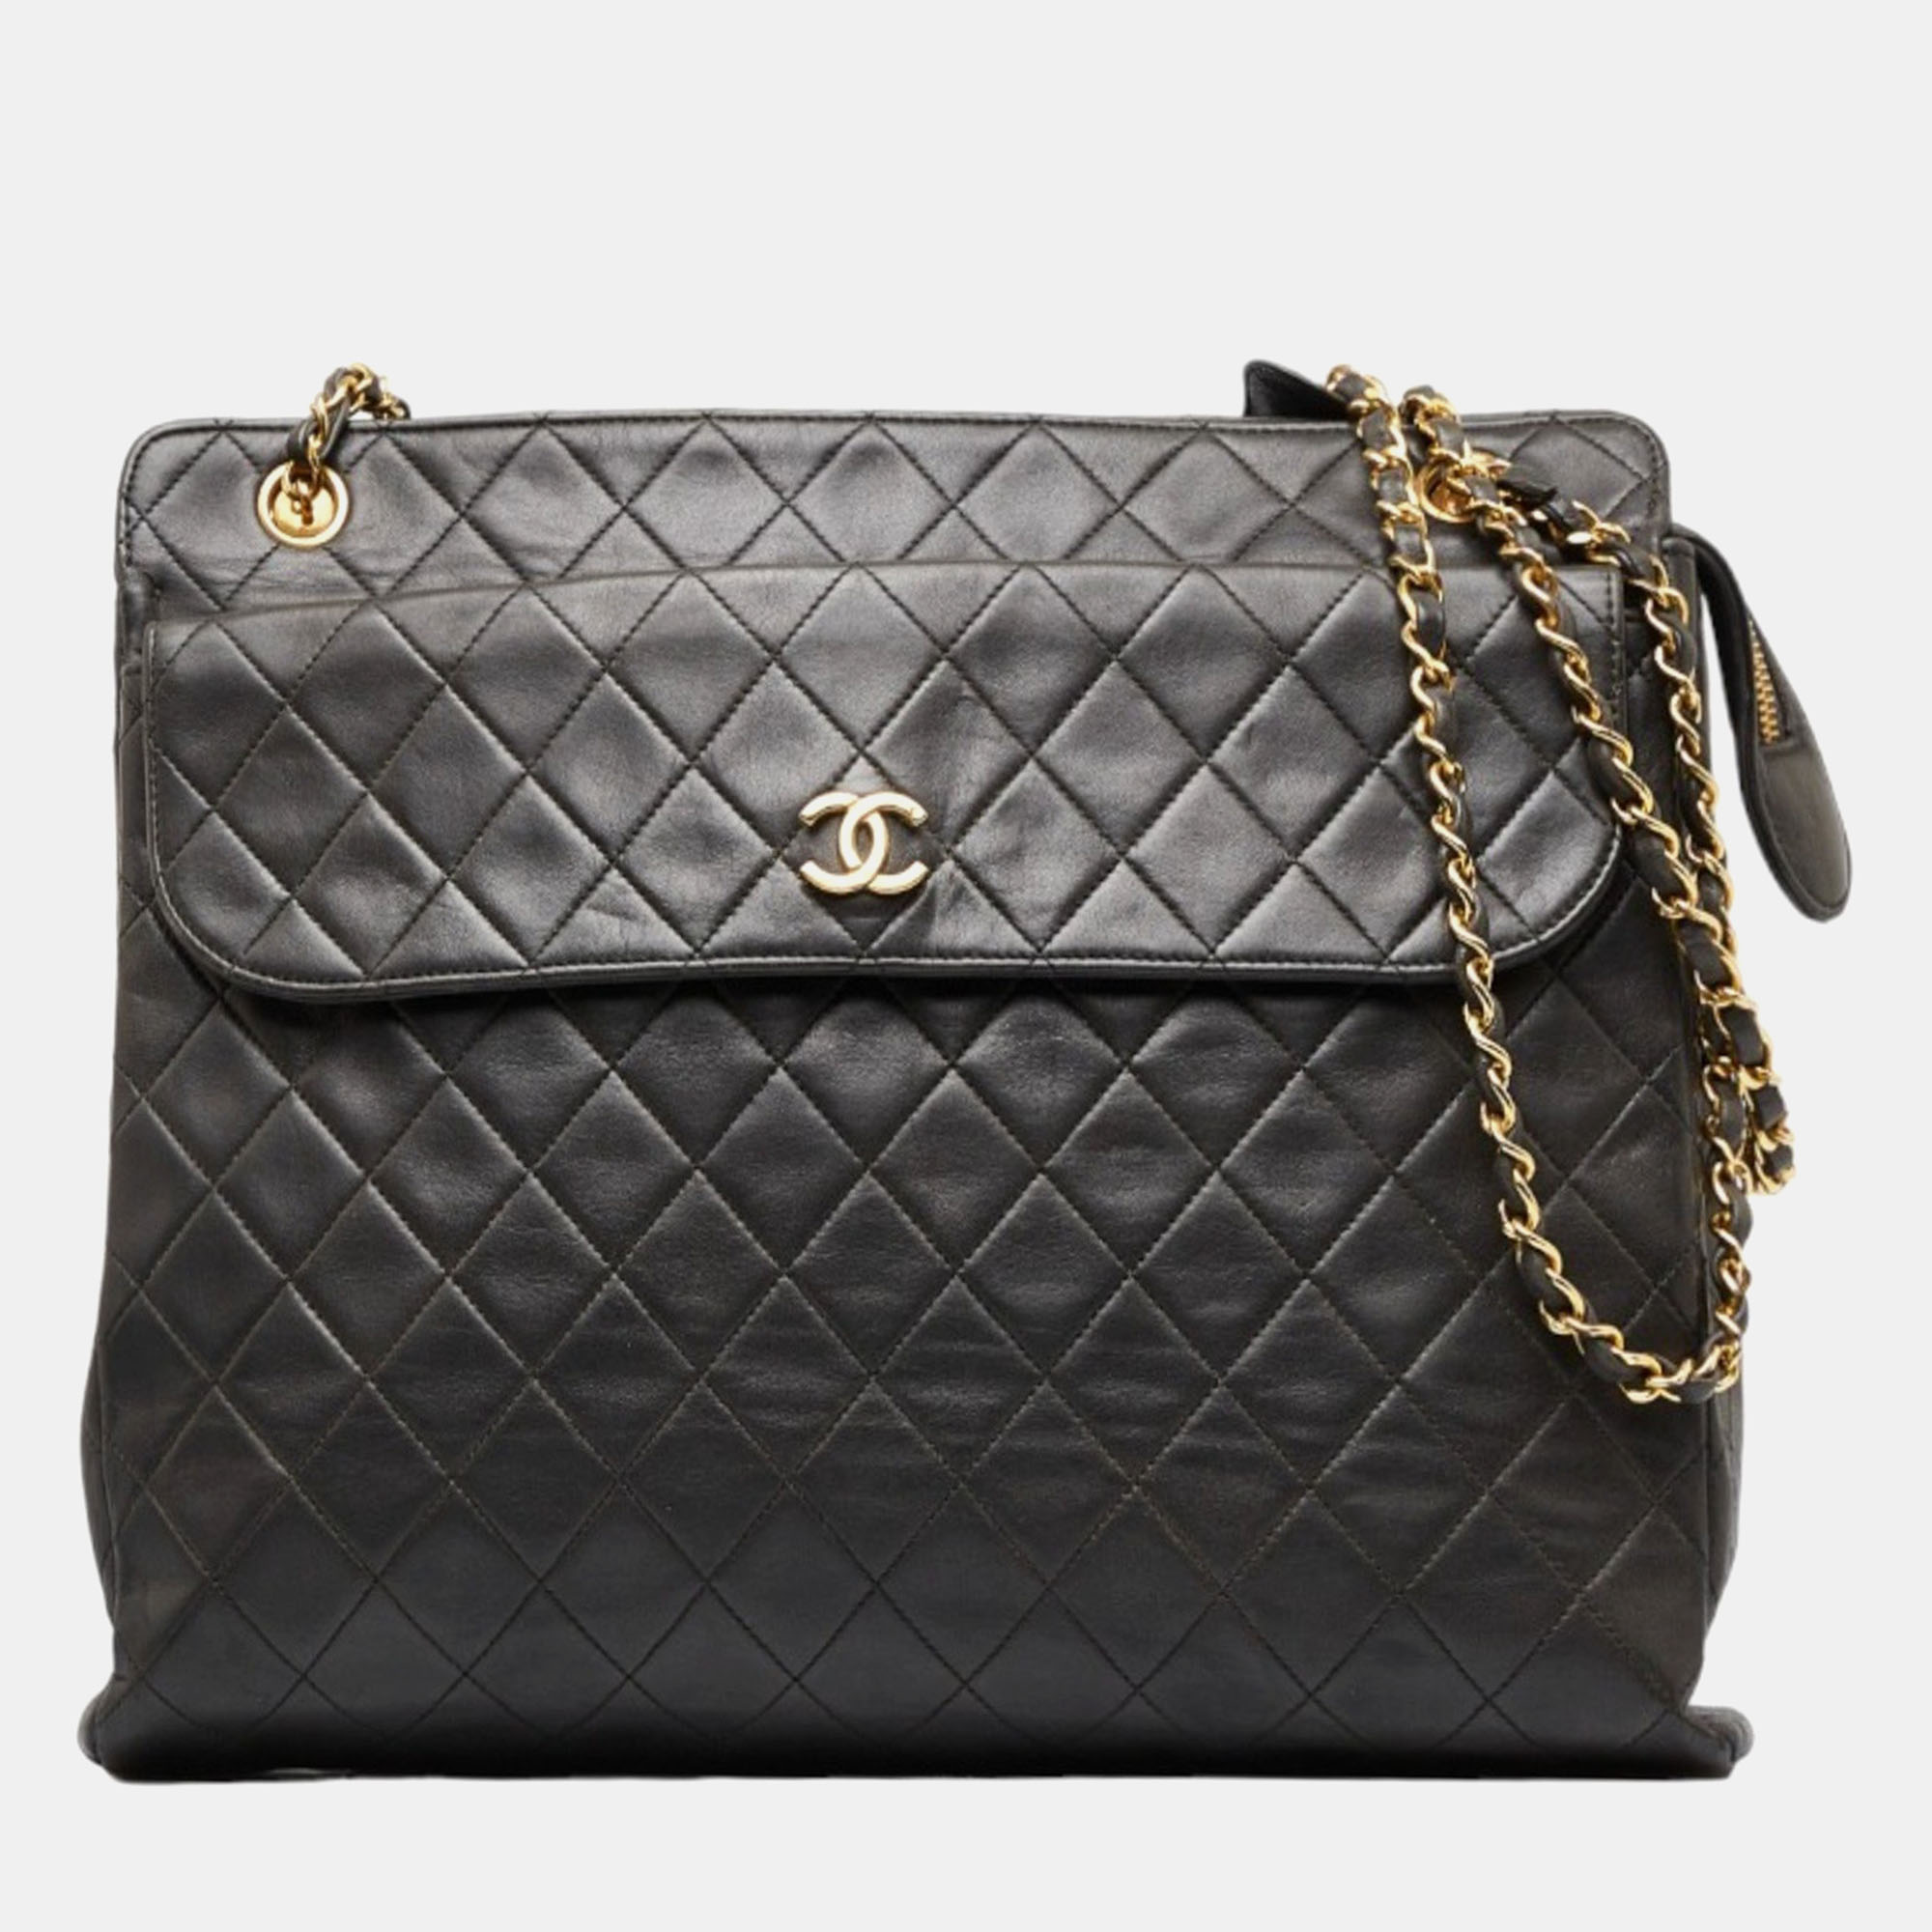 Chanel black cc quilted leather chain shoulder bag